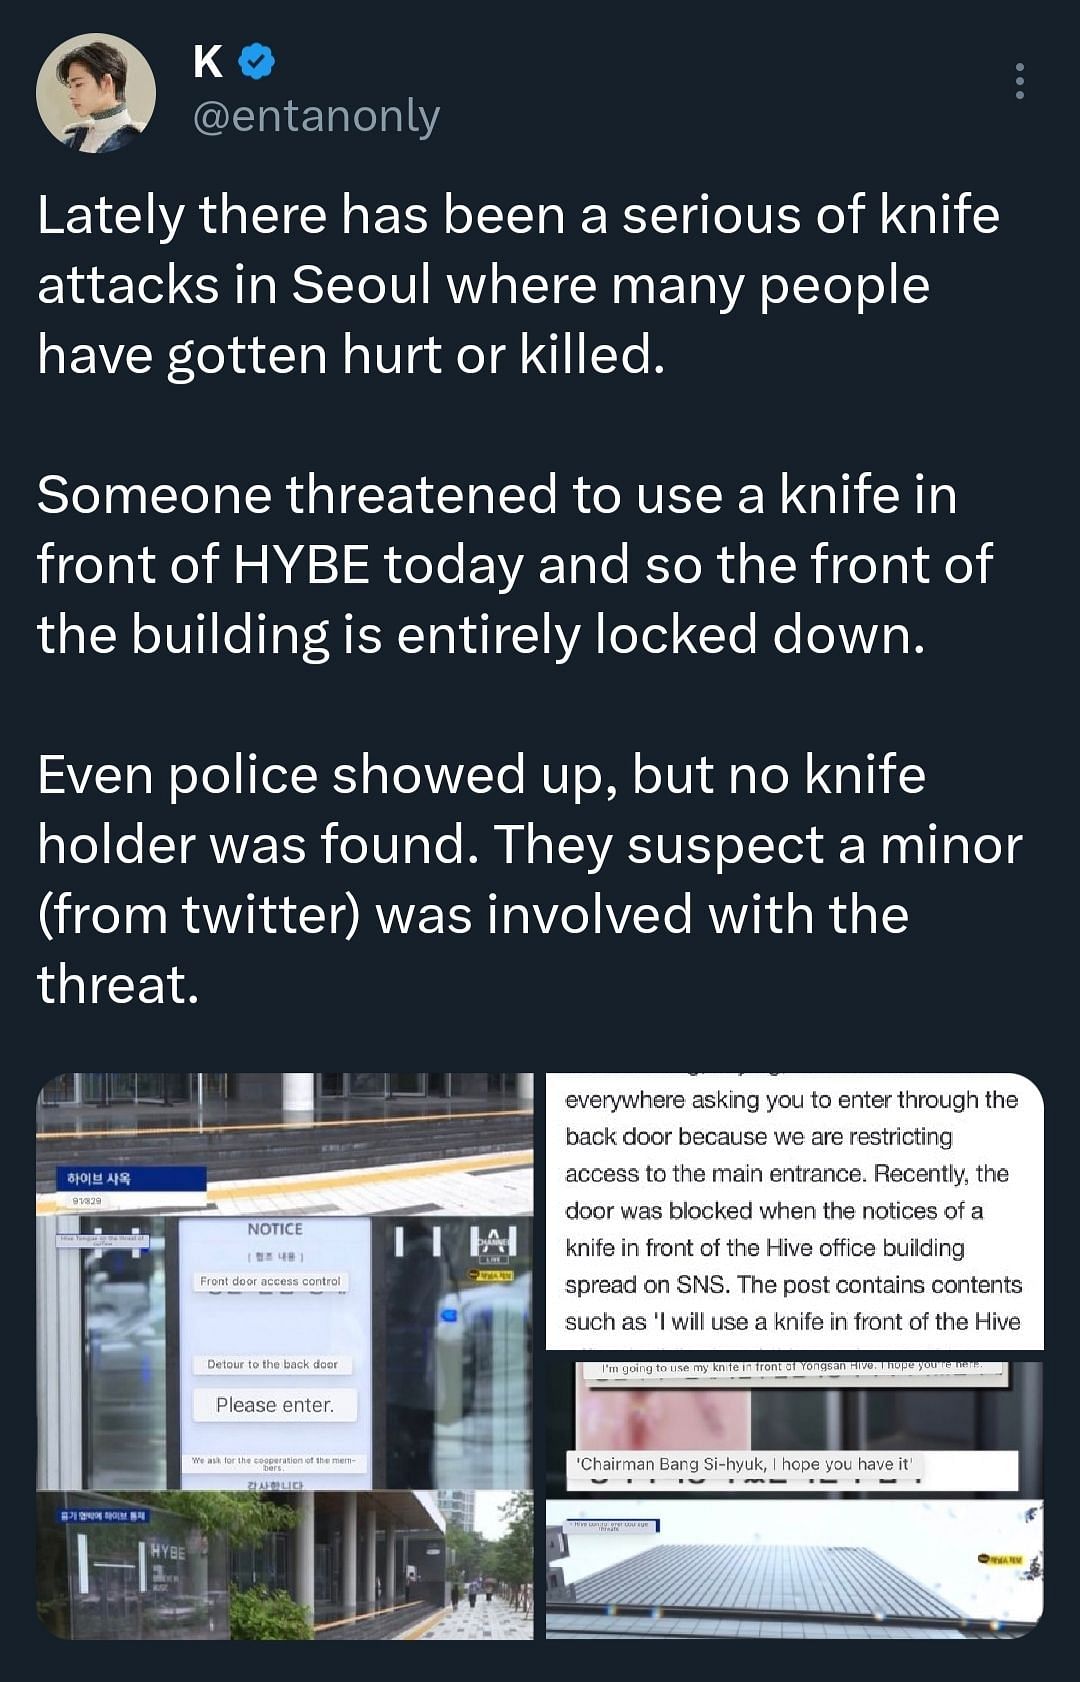 About Knife Threat at HYBE (Image via etanonly @Twitter)